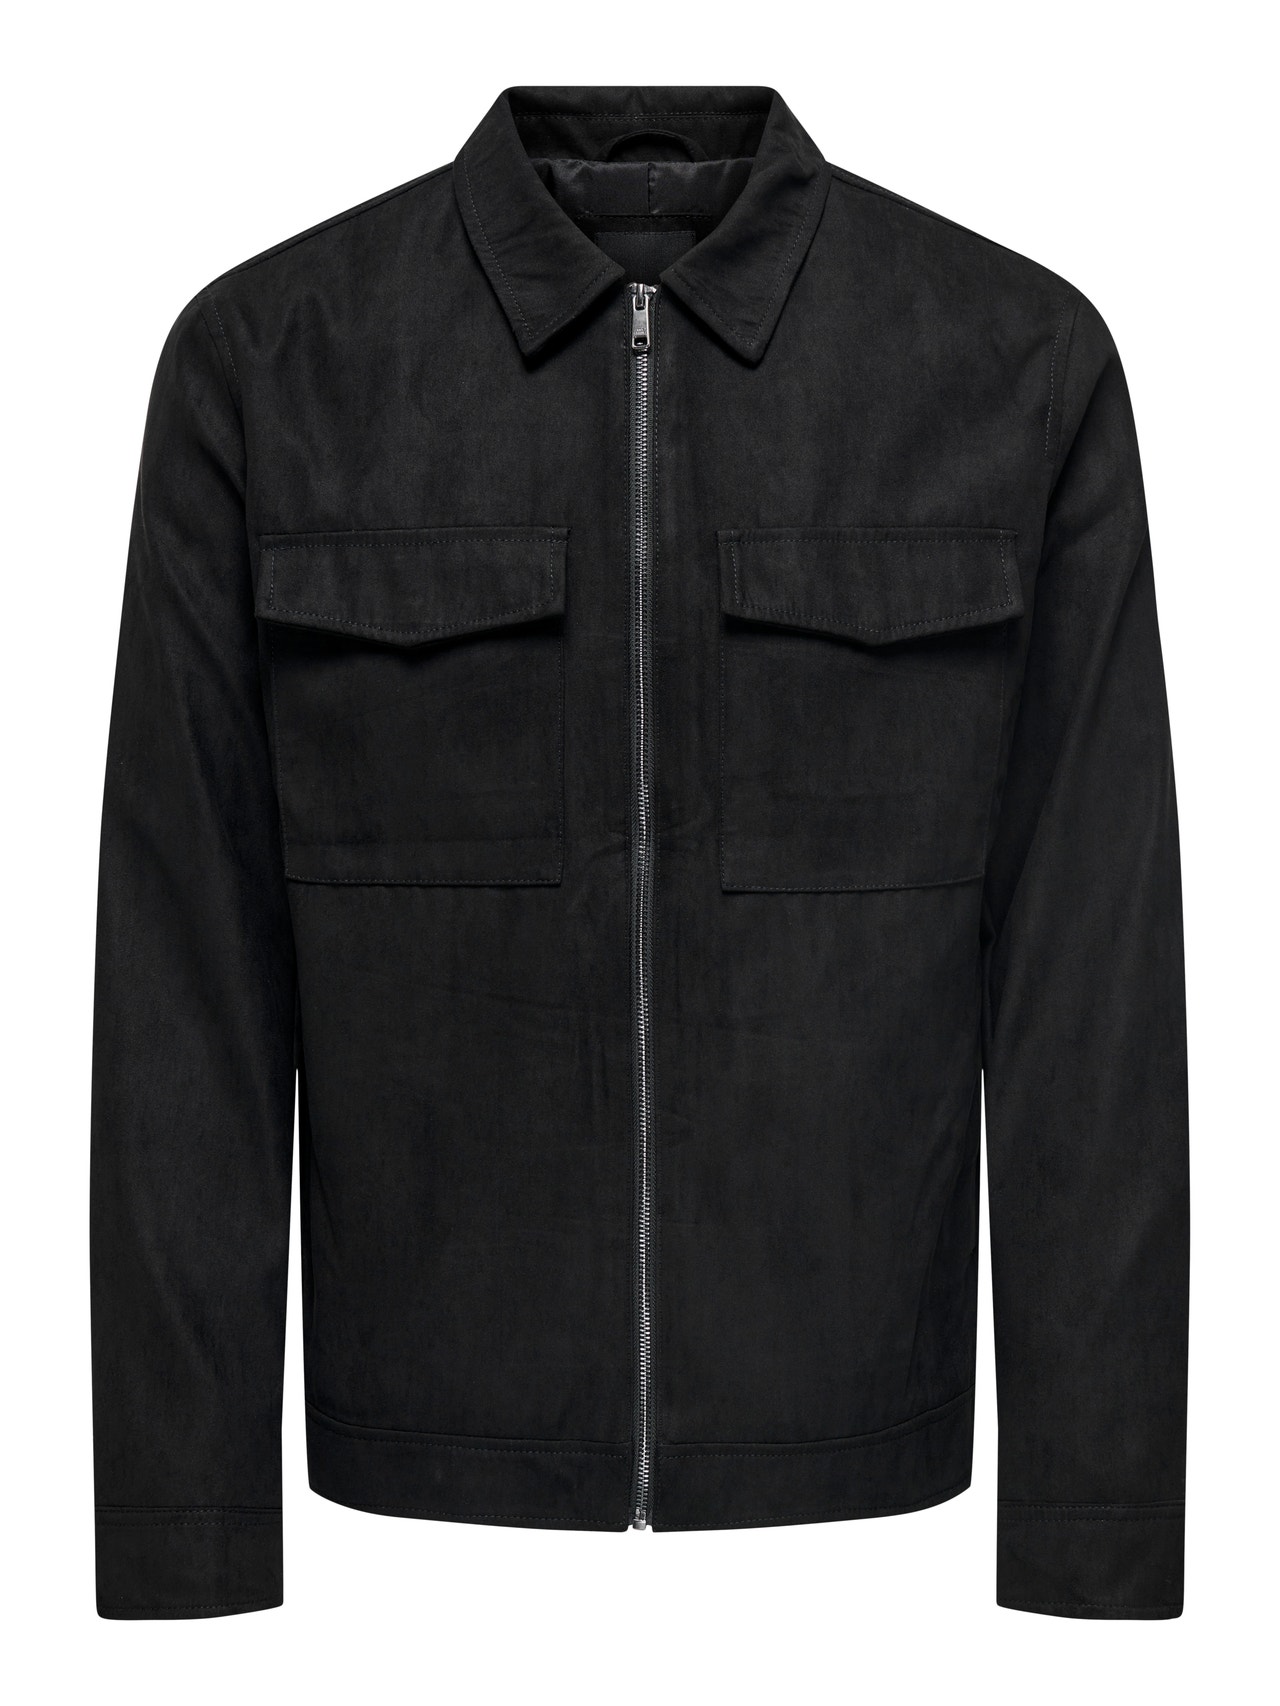 ONLY & SONS Biker jacket with chest pockets -Black - 22025811